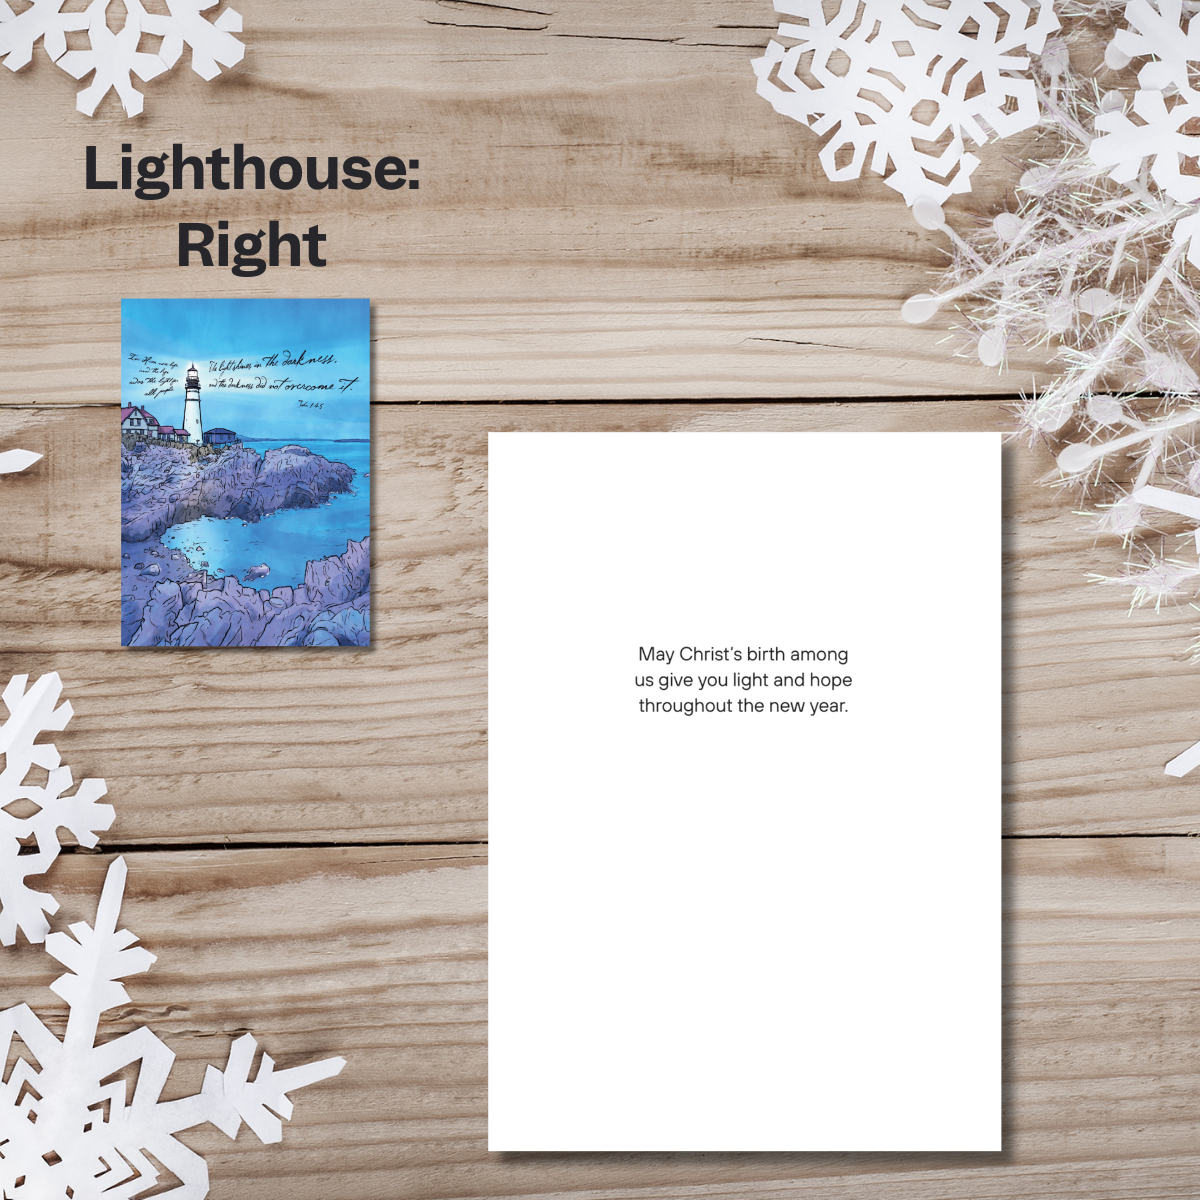 Ornaments & Lighthouse Christmas Card Variety Pack